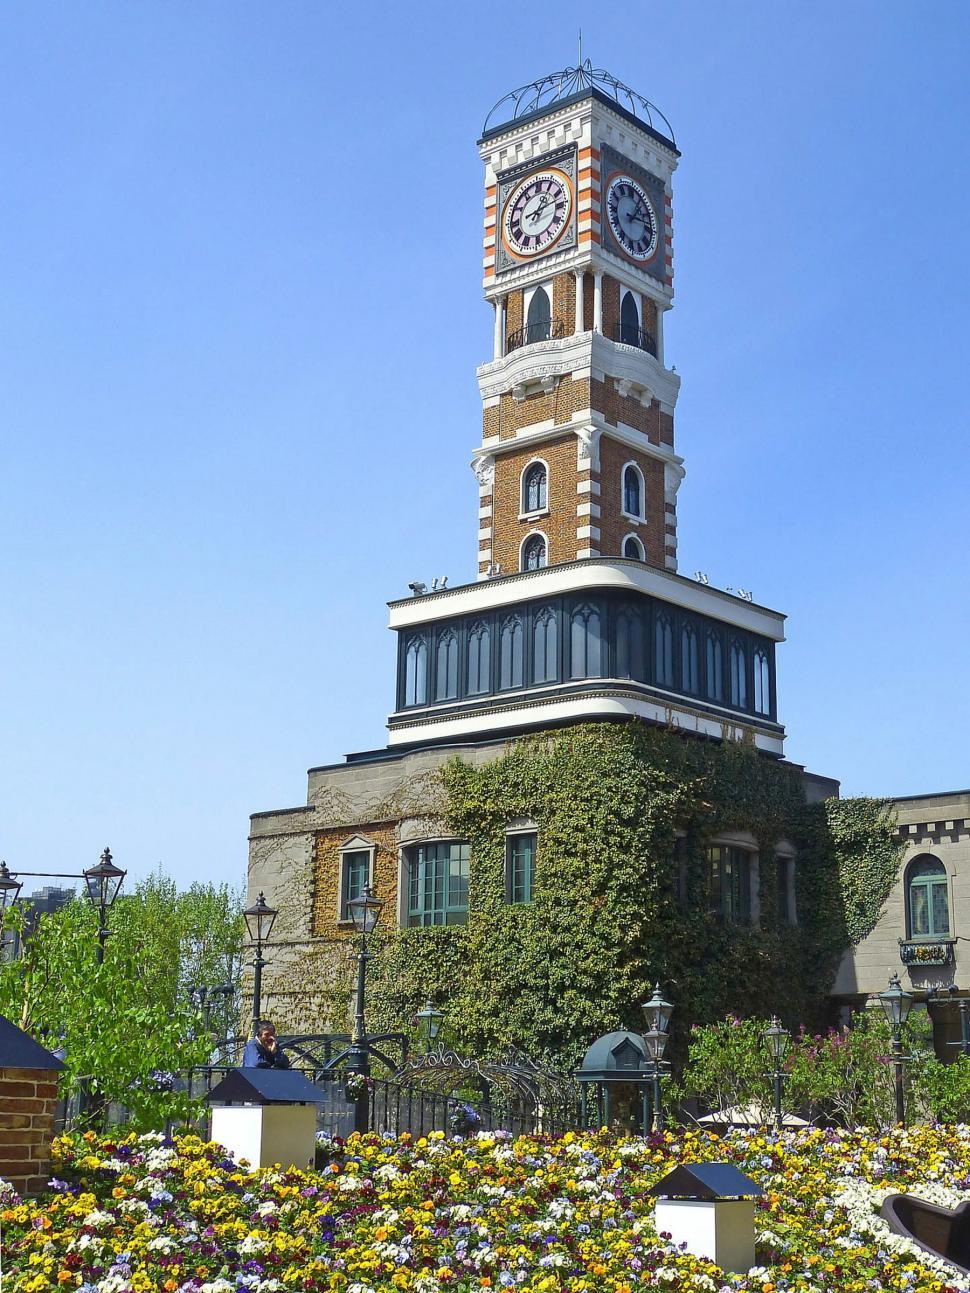 Free Image of Clock Tower 